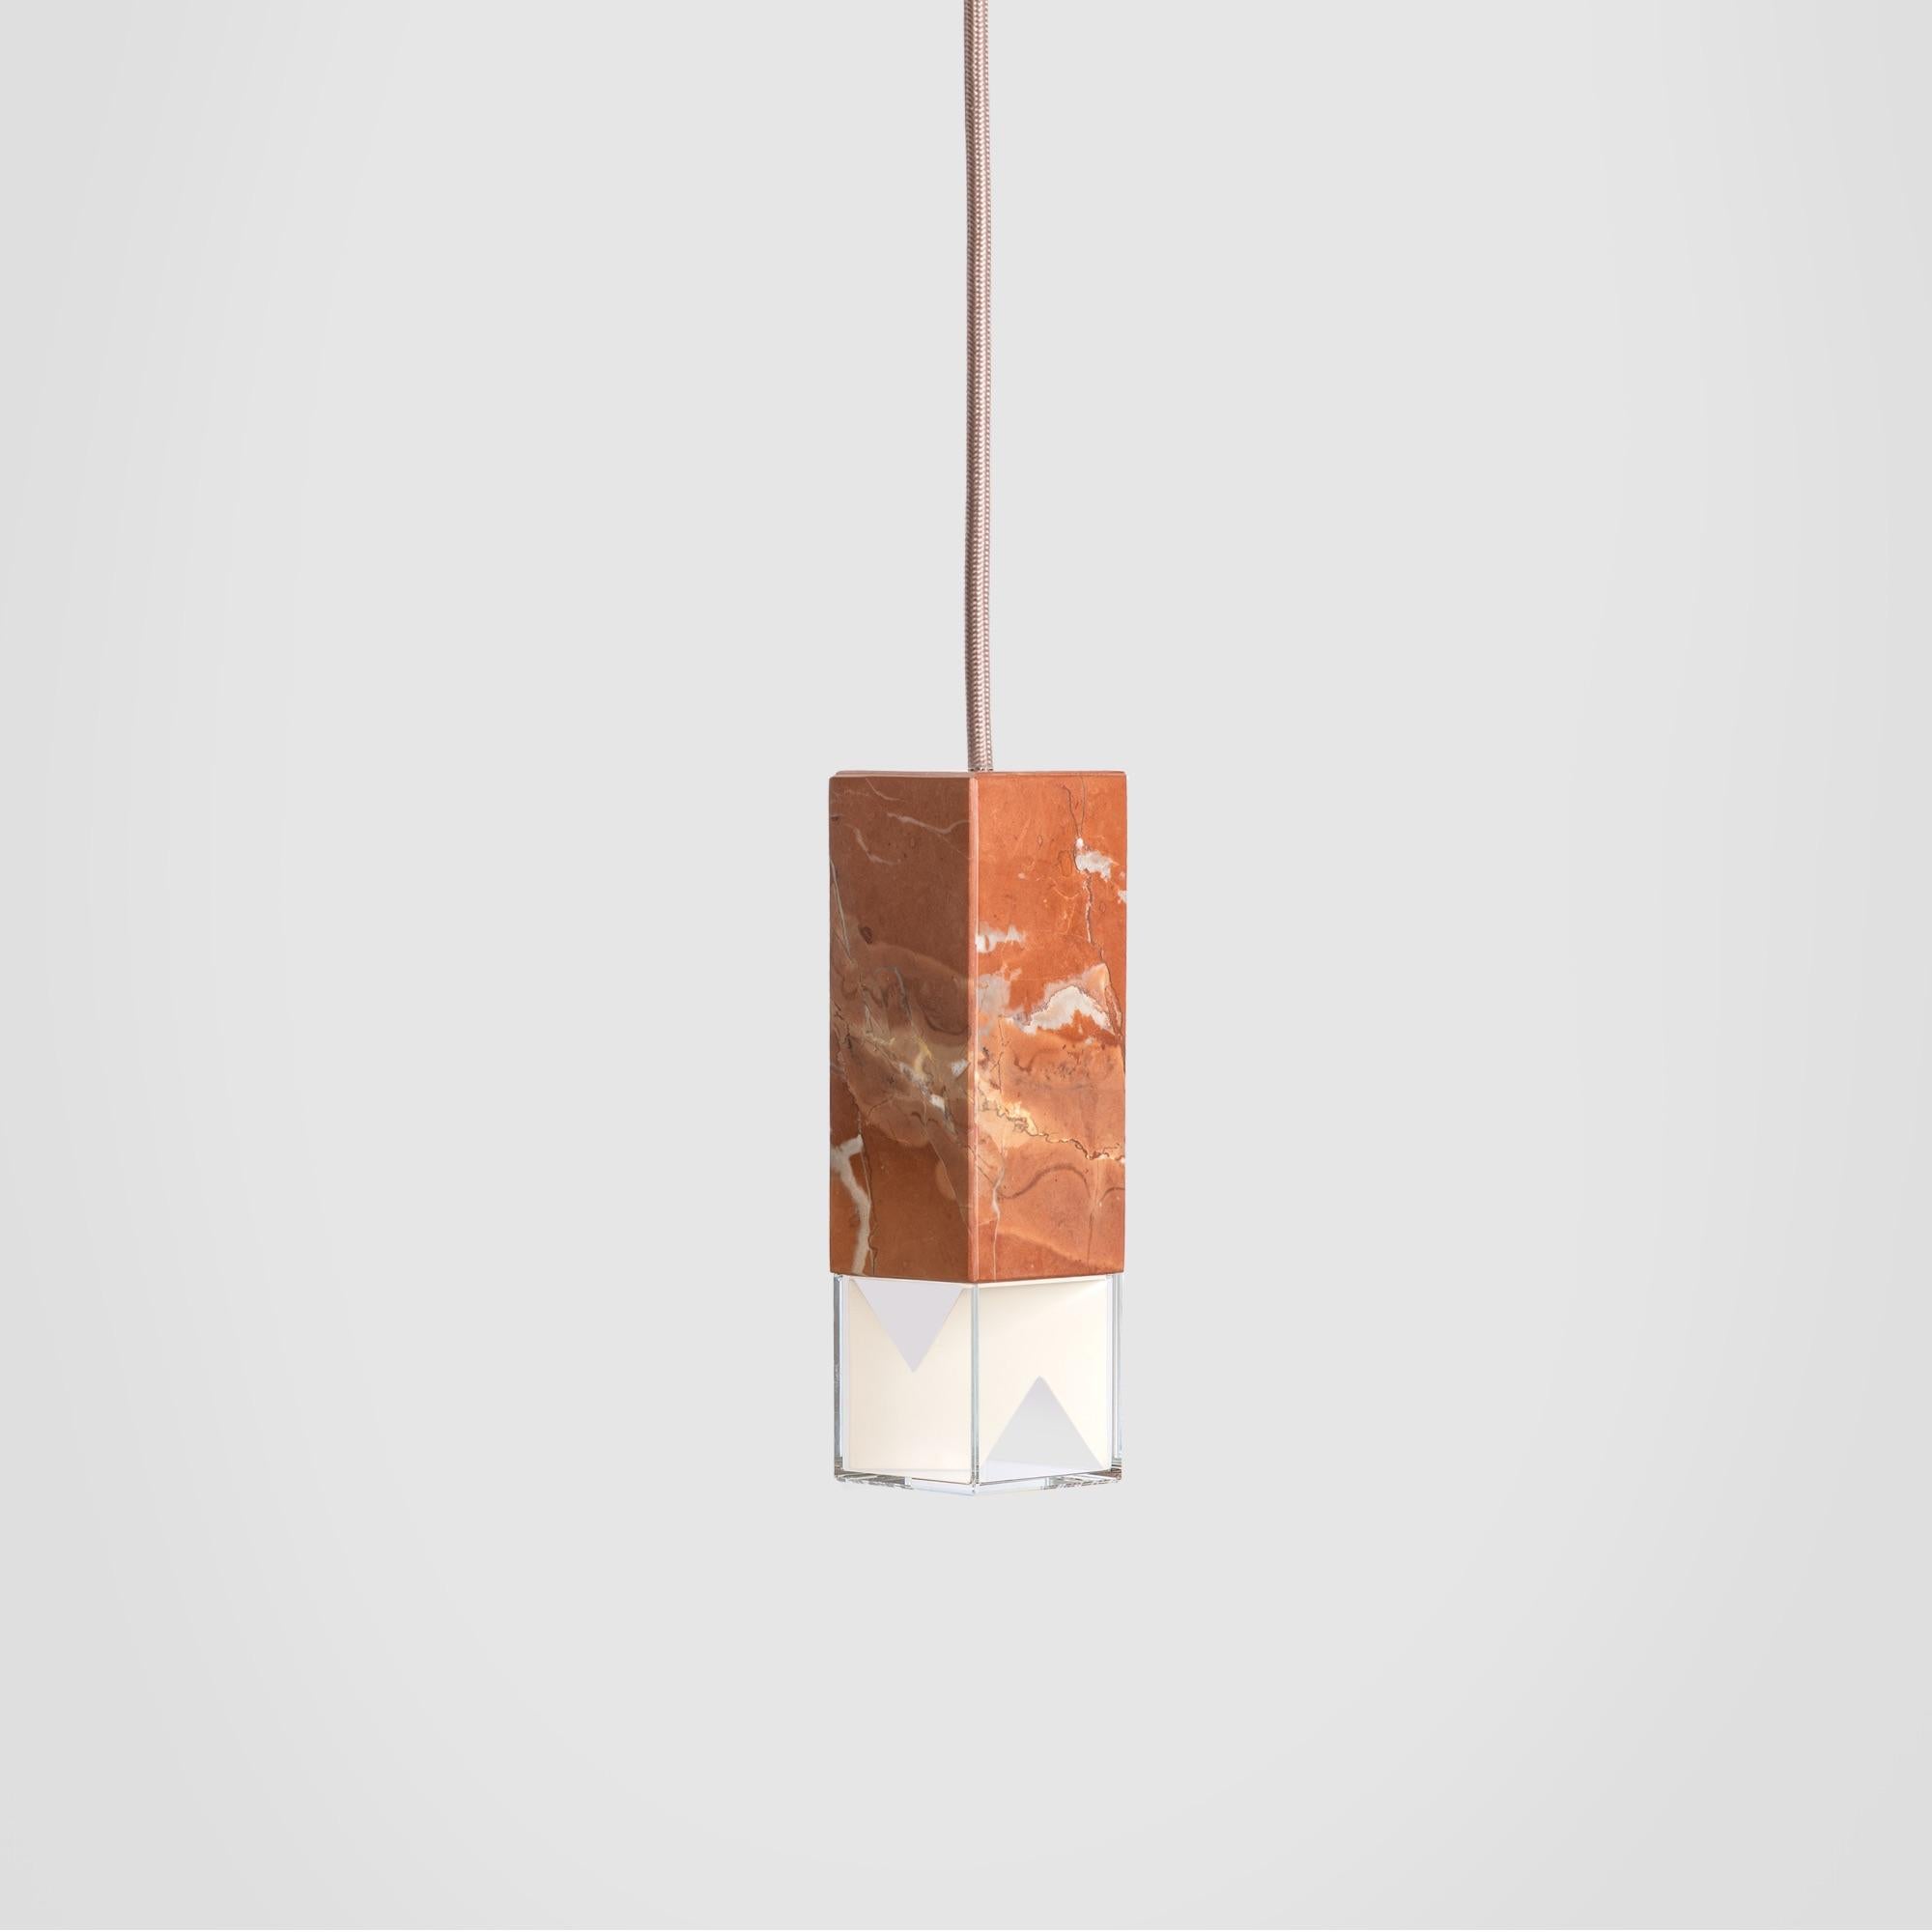 About
Contemporary Pendant Light Handcrafted in Red Marble by Formaminima

Lamp/One Red from Colour Edition
Design by Formaminima
Single Pendant
Materials:
Body lamp handcrafted in solid marble Red Collemandina / crystal glass diffuser hosting